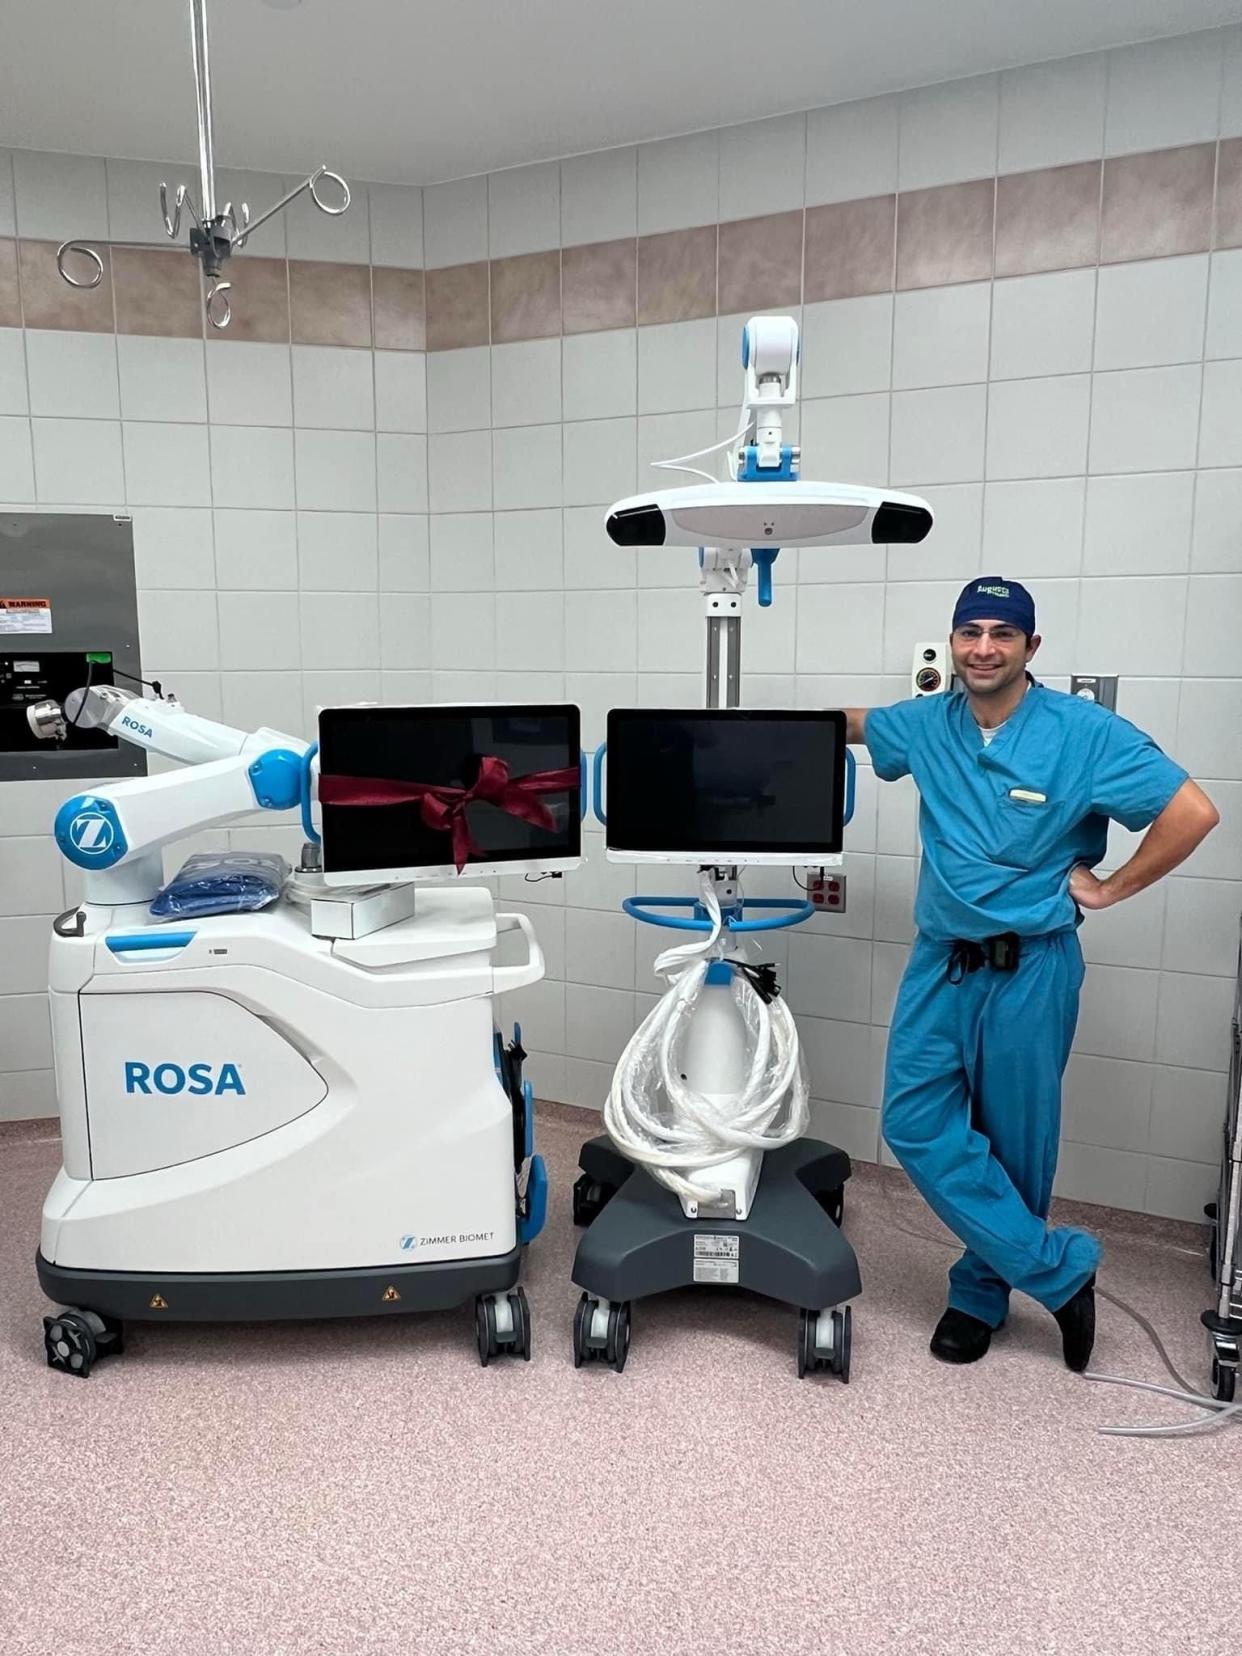 Orthopedic Surgeon Dr. G. Ryan Rieser with Shenandoah Valley Orthopedics and Sports Medicine standing by Zimmer Biomet’s ROSA Knee System at Augusta Health.